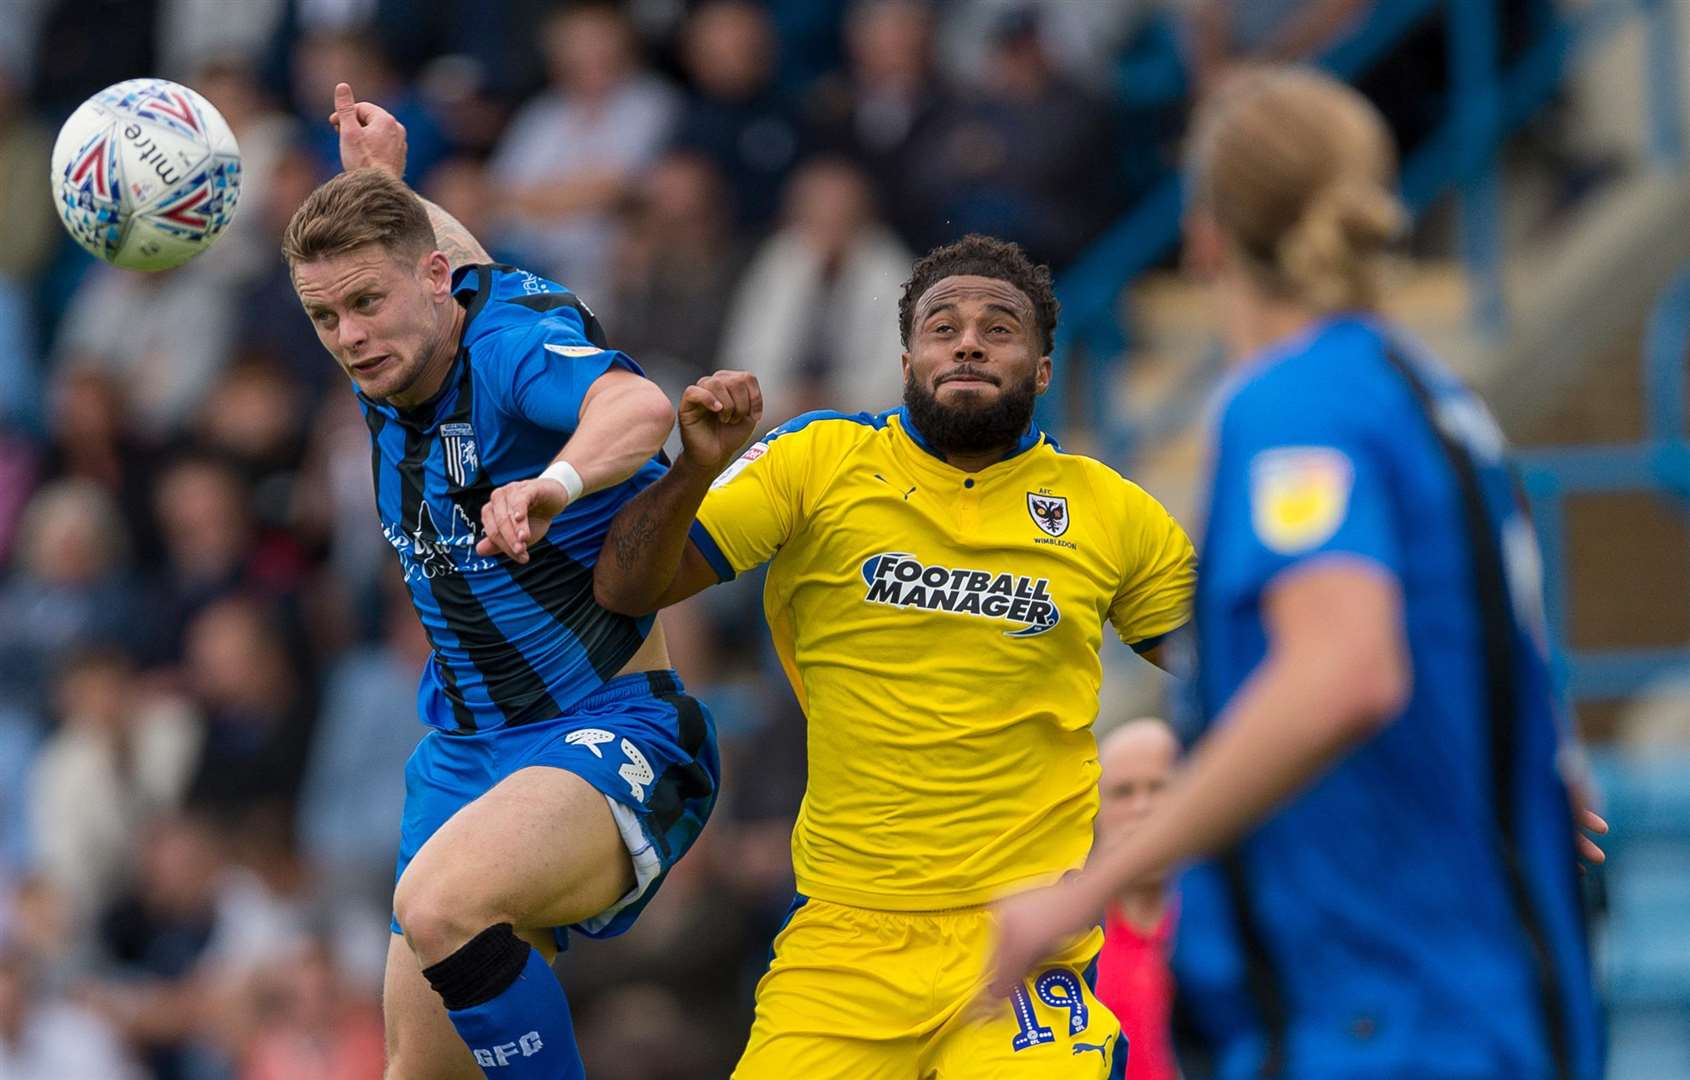 Gills' Mark Byrne challenges with Tom Soares Picture: Ady Kerry